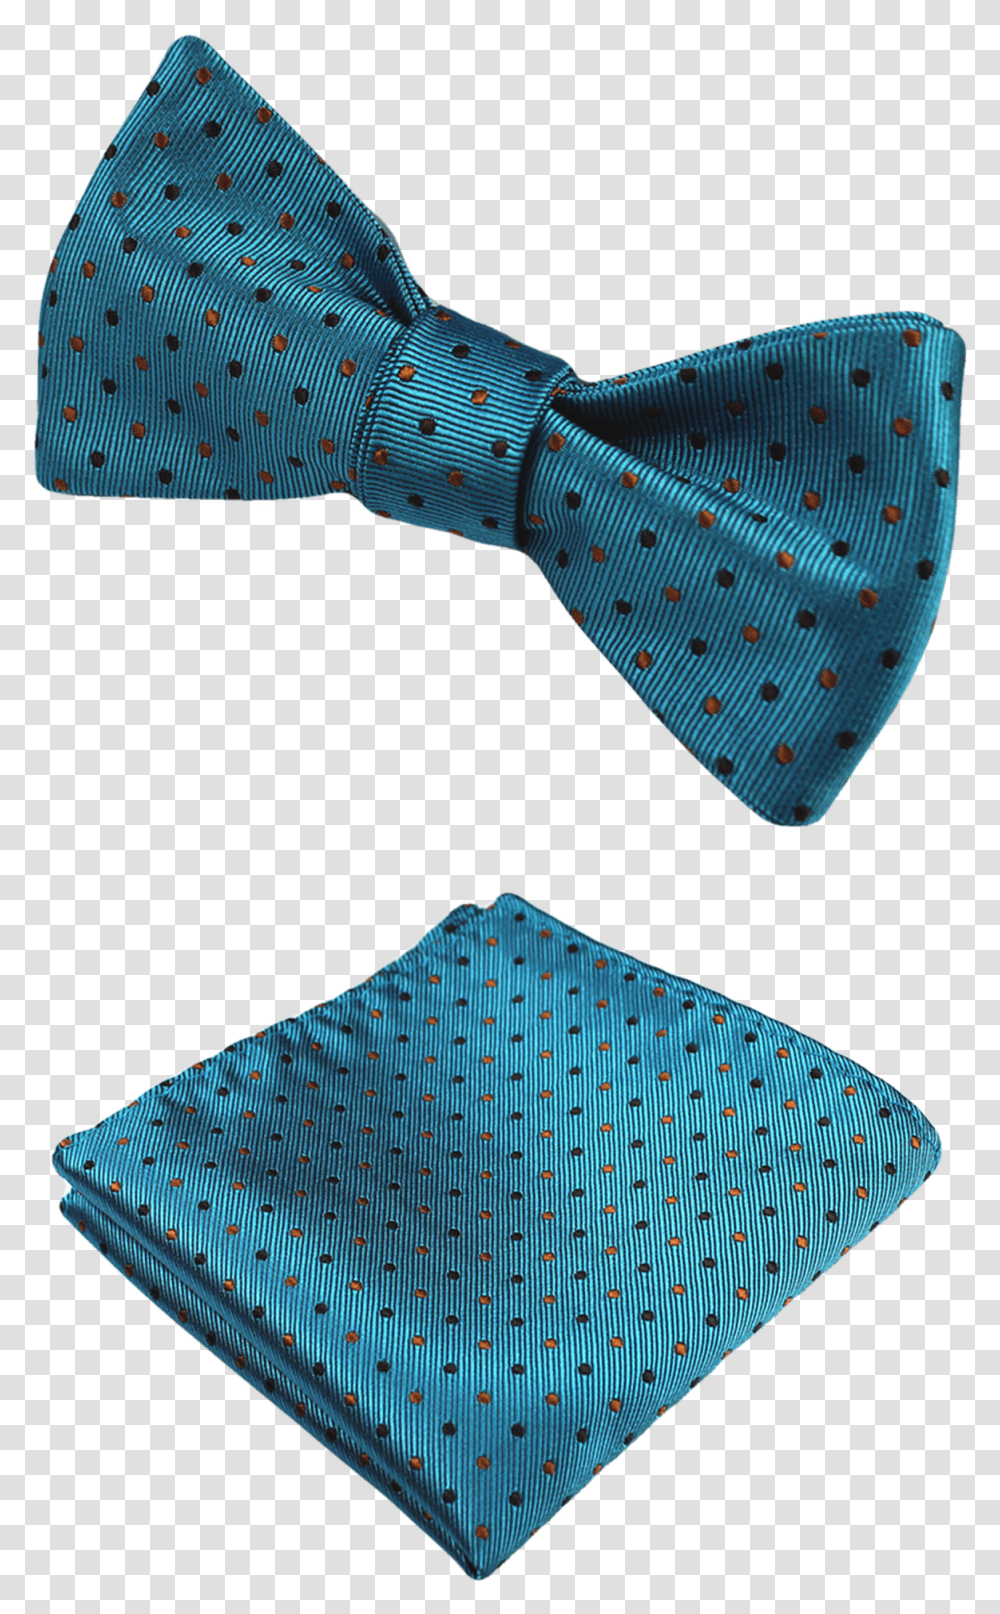 Teal Black Amp Gold Bow Tie And Pocket Square Polka Dot, Accessories, Accessory, Rug, Necktie Transparent Png